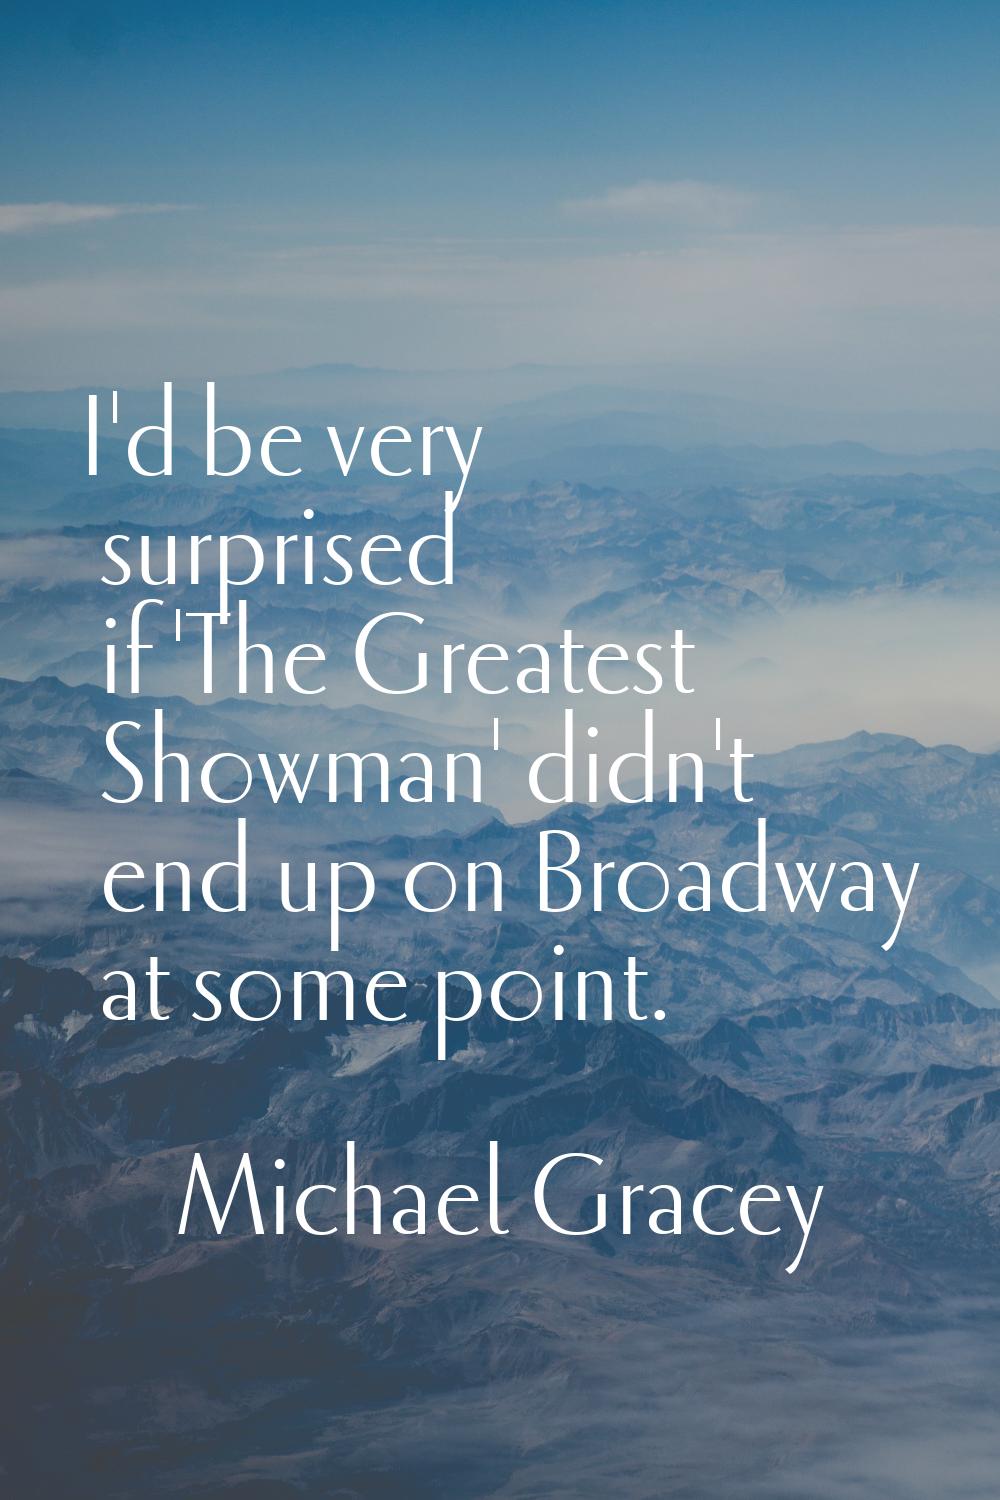 I'd be very surprised if 'The Greatest Showman' didn't end up on Broadway at some point.